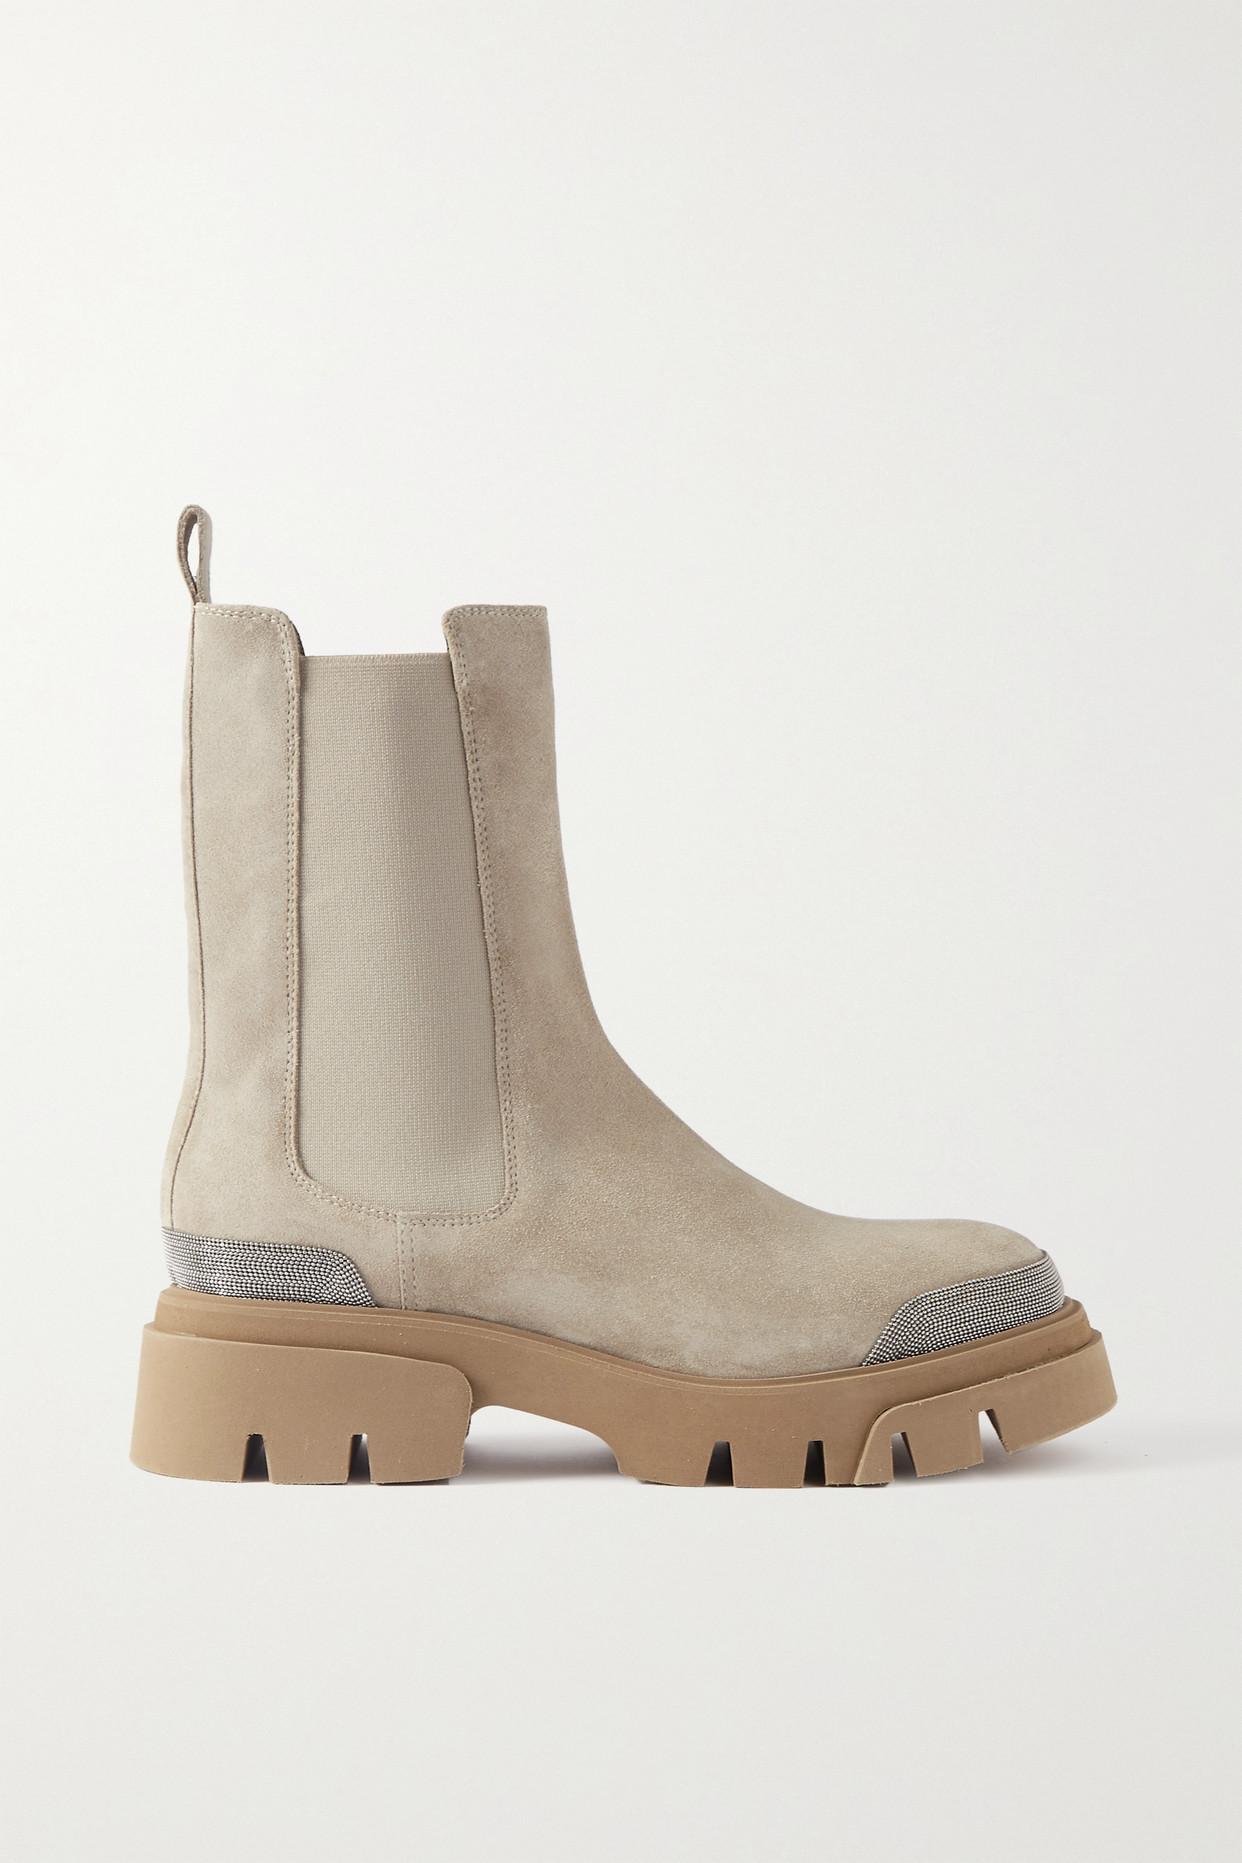 Brunello Cucinelli Bead-embellished Suede Chelsea Boots in Natural | Lyst